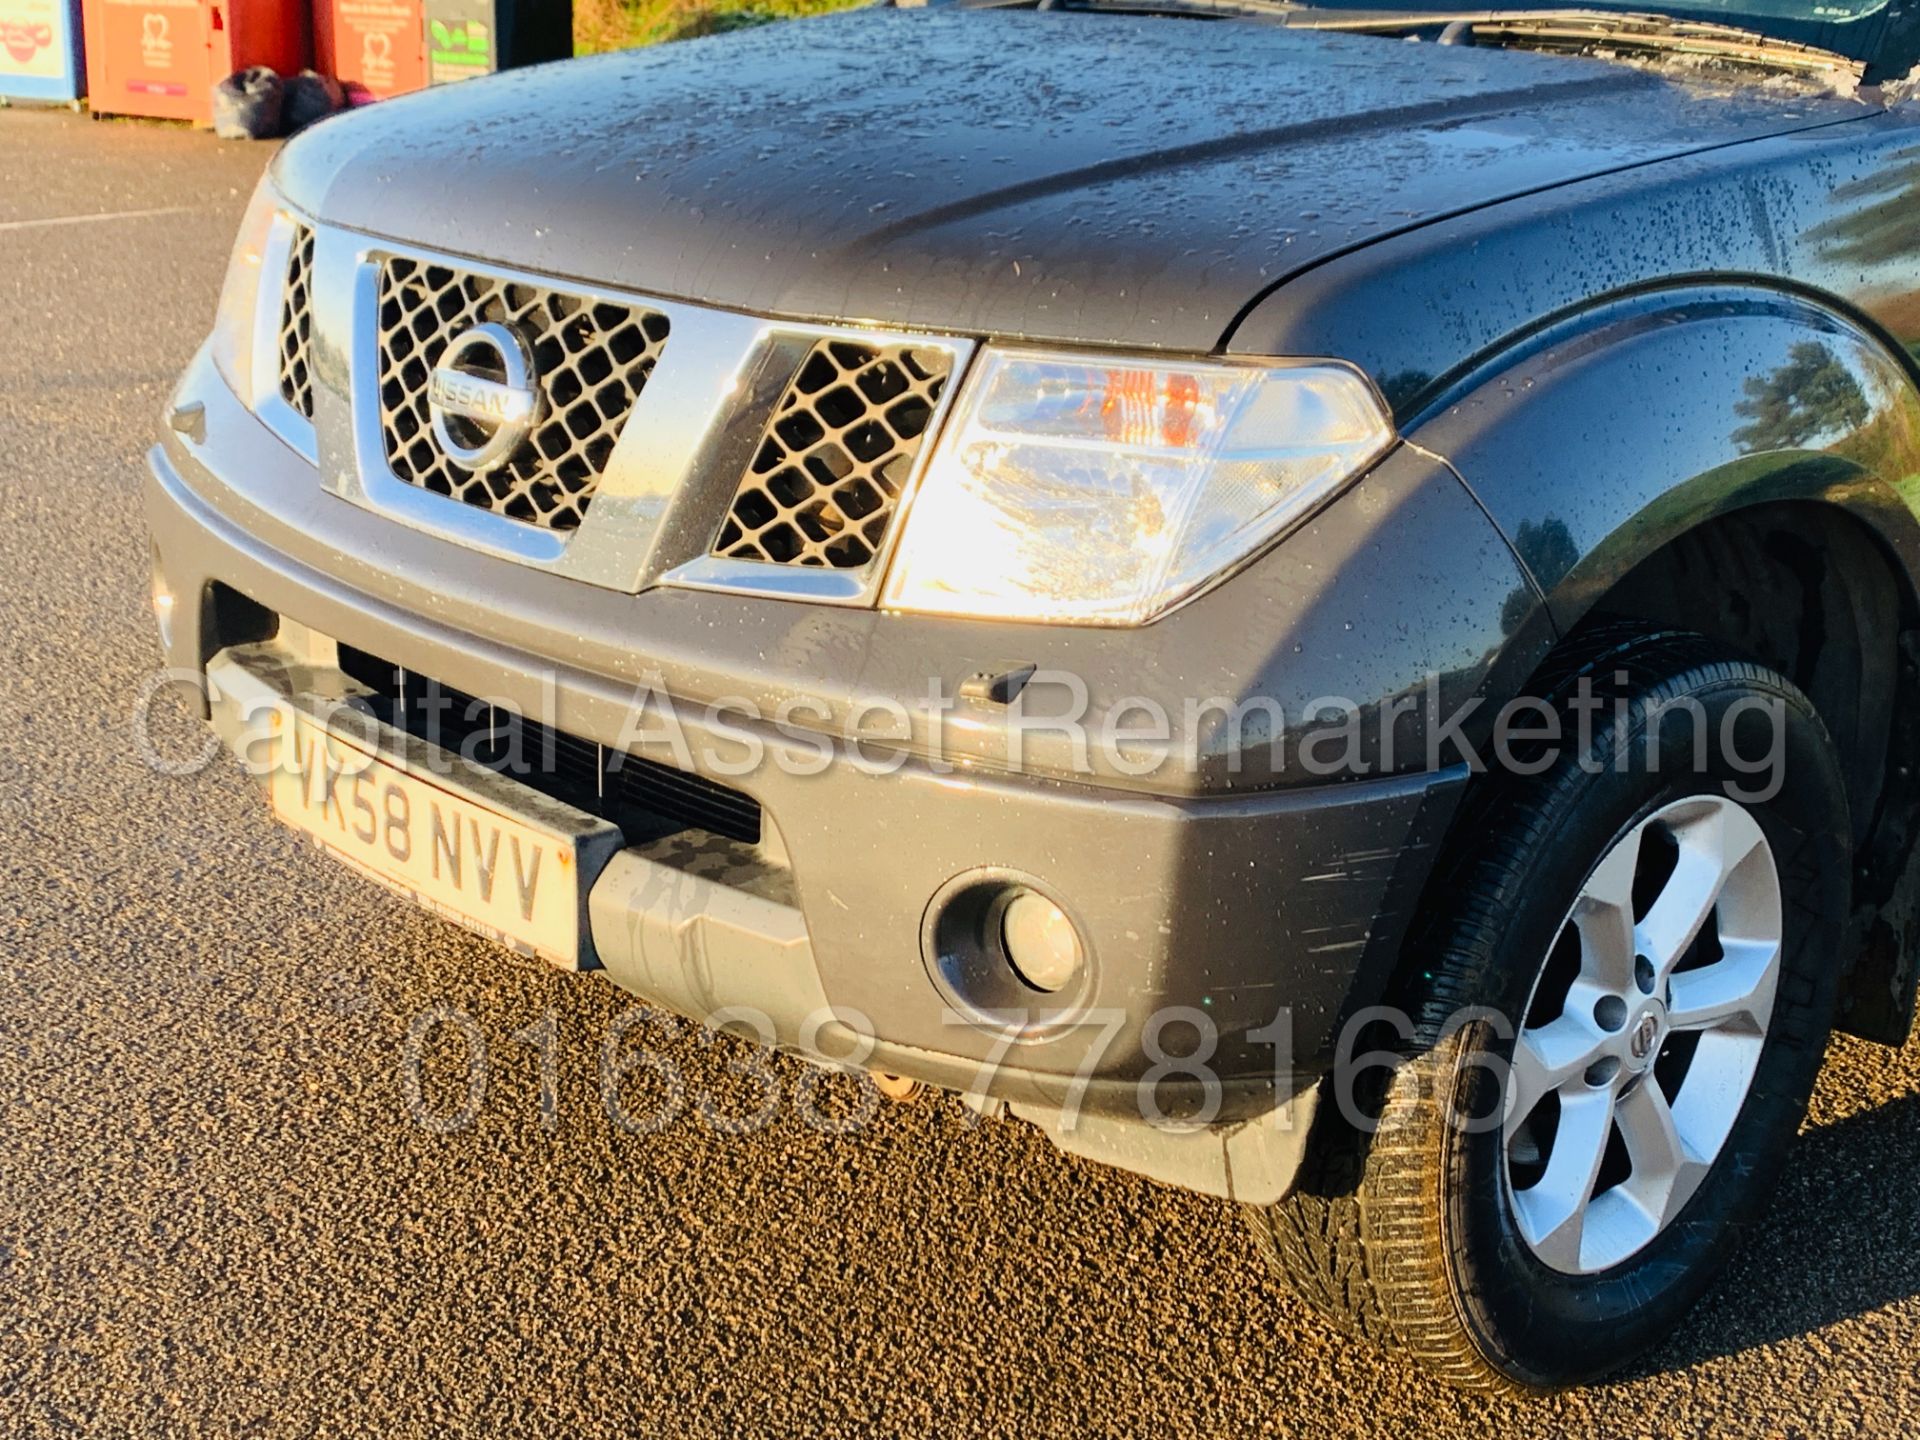 ON SALE NISSAN NAVARA *OUTLAW* DOUBLE CAB PICK-UP *4X4* (2009) '2.5 DCI-171 BHP-*AIR CON* (NO VAT) - Image 13 of 42